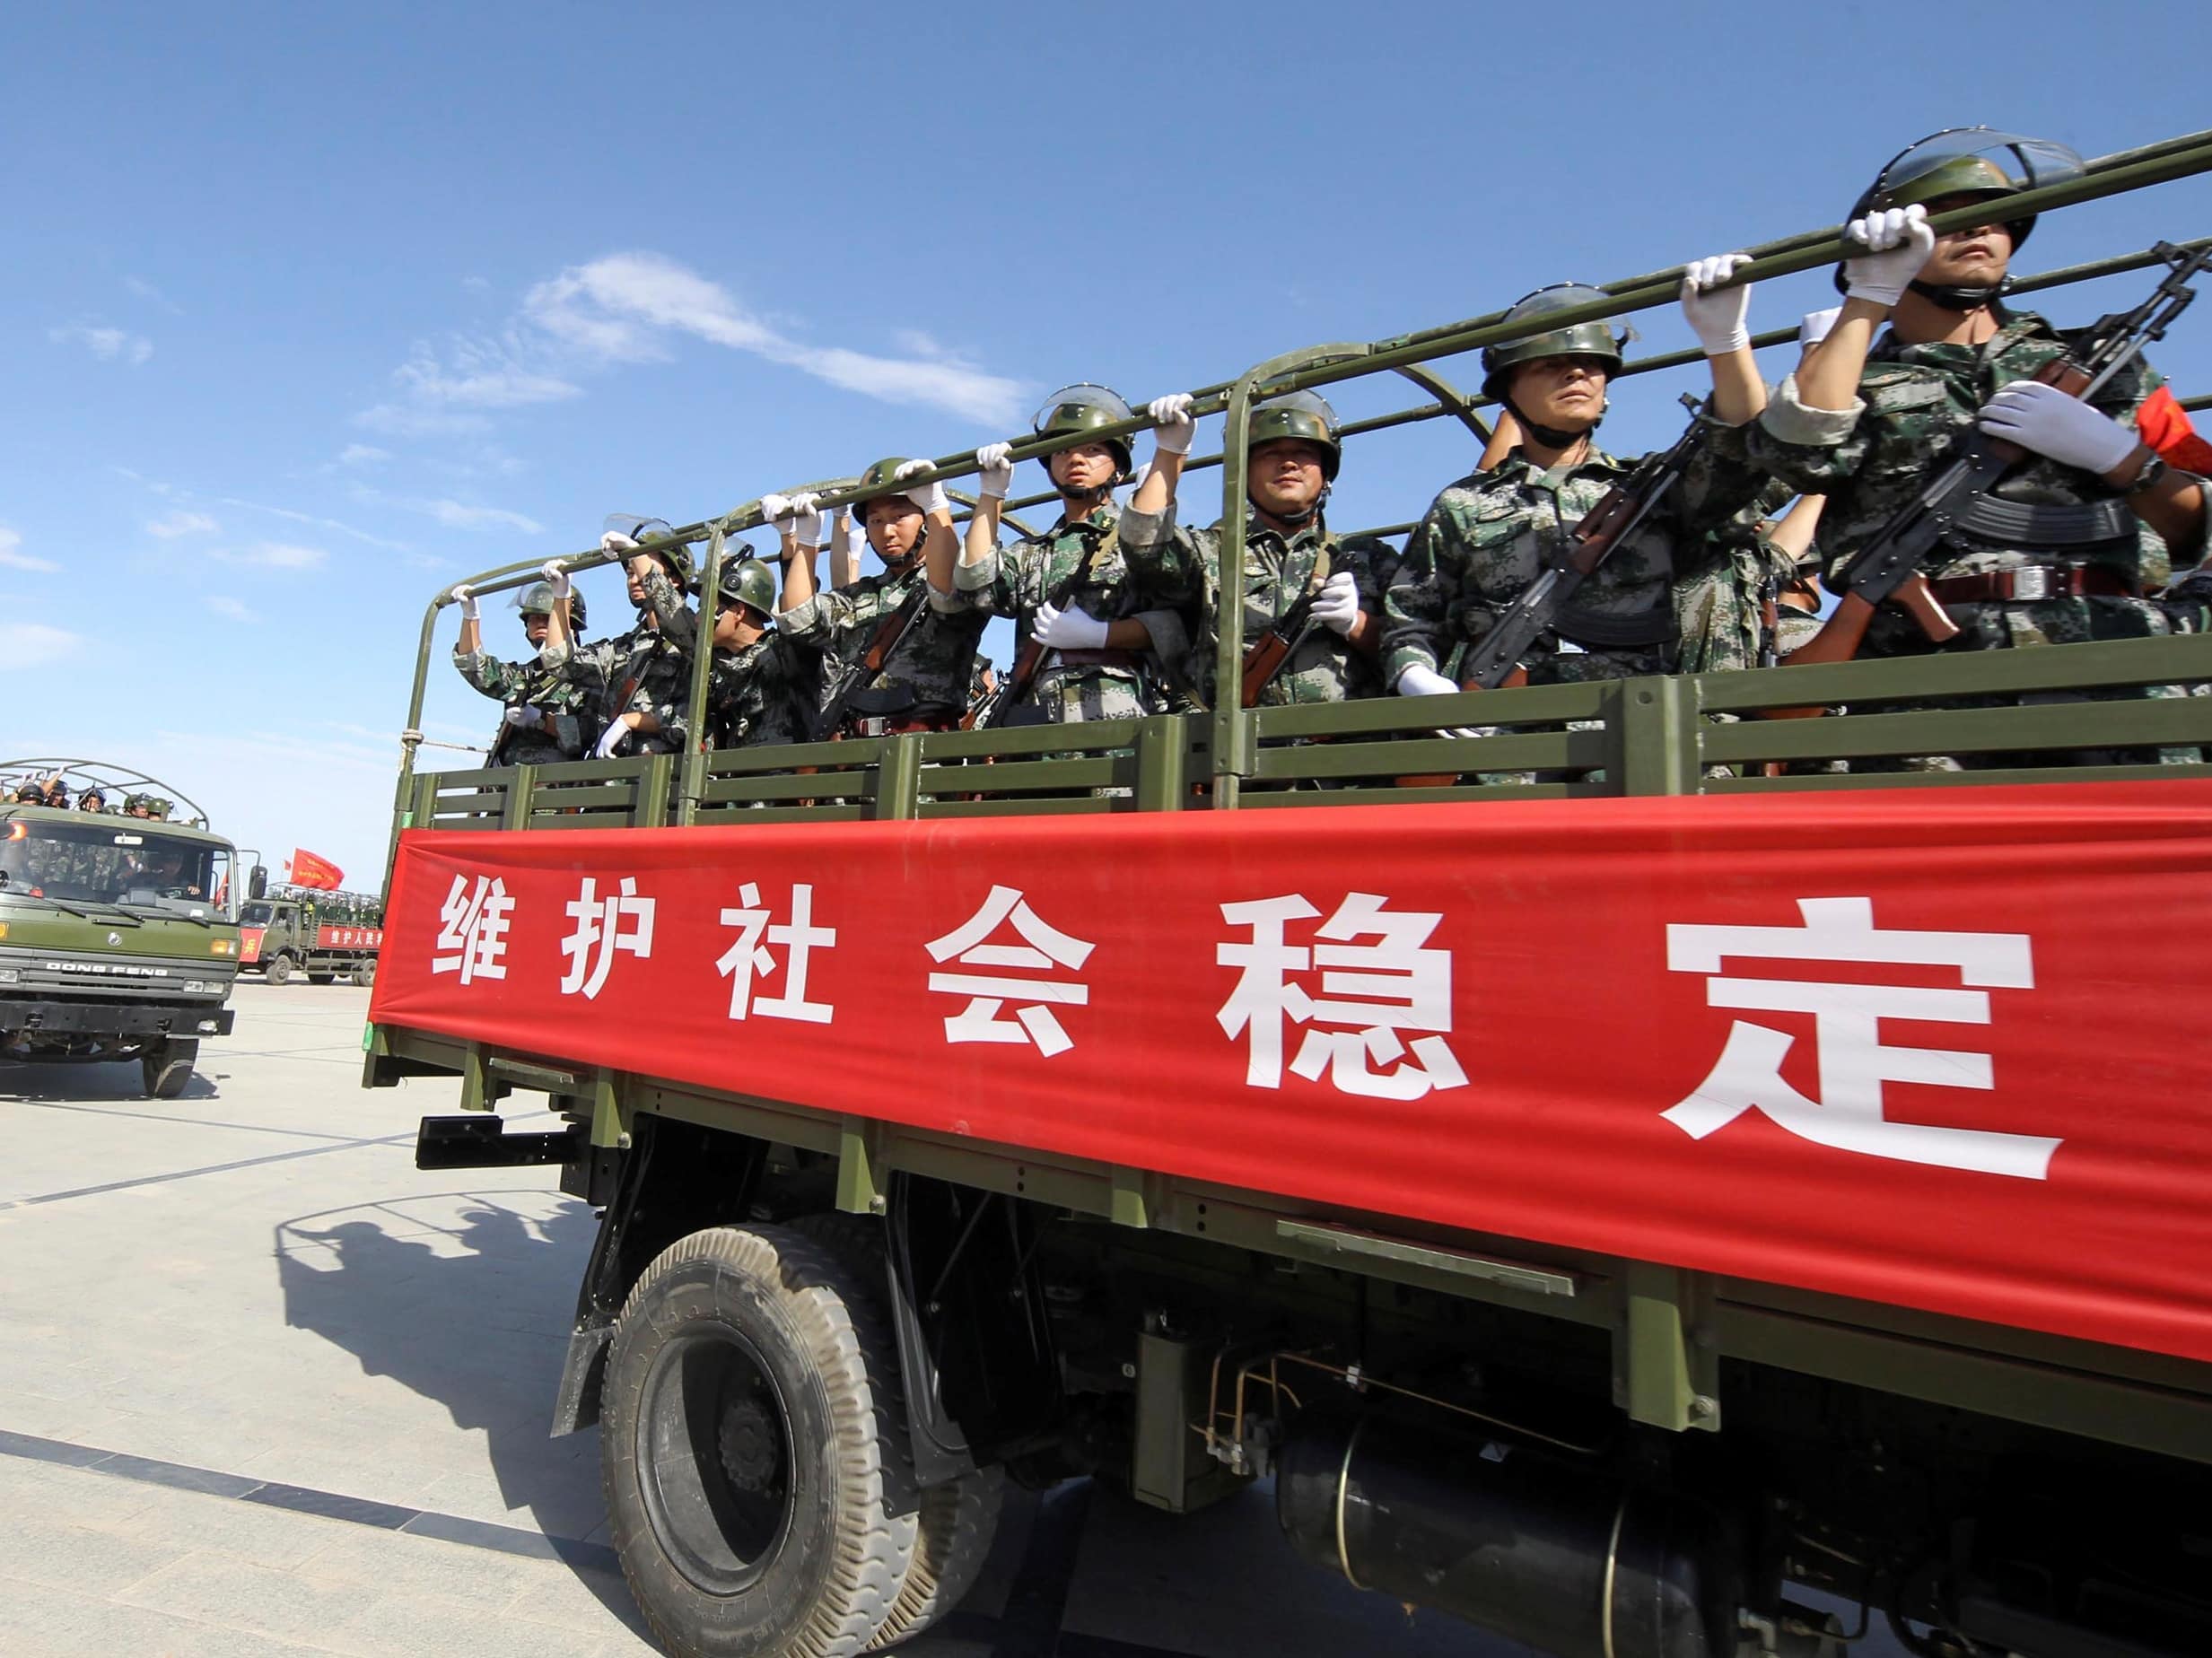 Armed members from a Chinese militia take part in an anti-terrorism joint exercise in Hami, Uighur Autonomous Region, 2 July 2013; the Chinese characters on the vehicle read, "Maintain social stability", REUTERS/Stringer